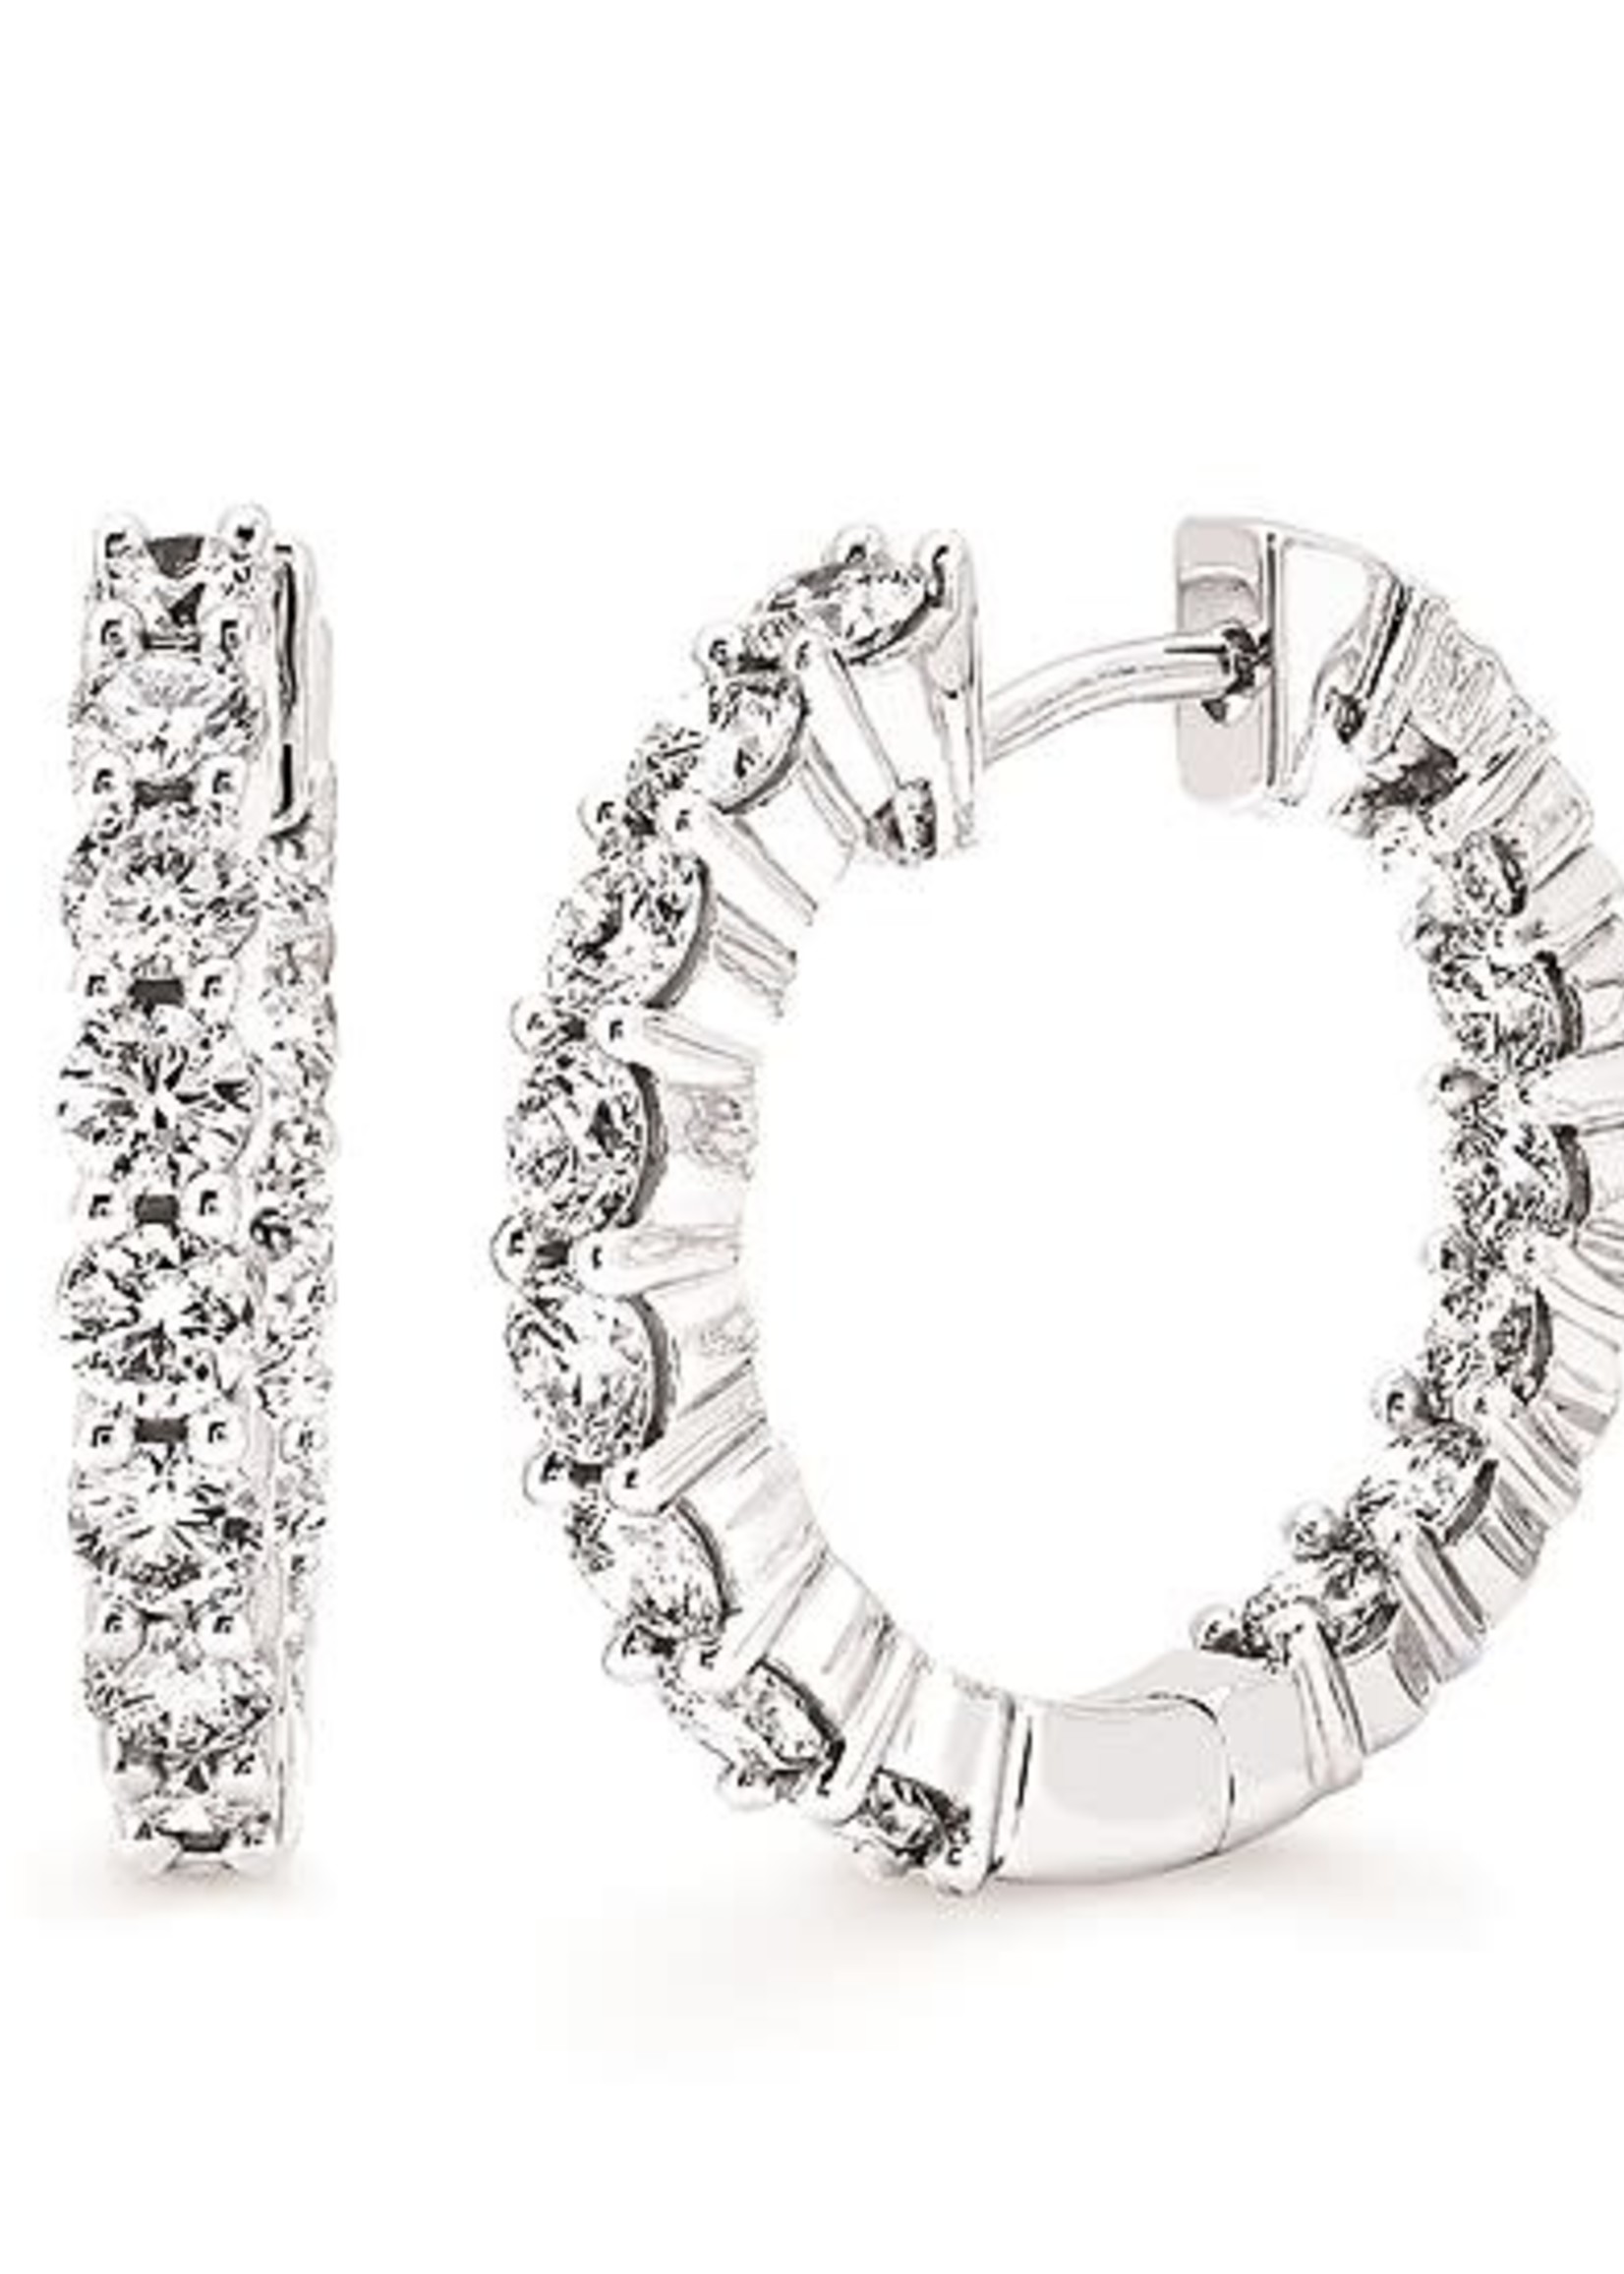 OSTBYE & ANDERSON 14KW  Lab-Created Diamond Inside-out Hoop Earrings 2.01CTTW